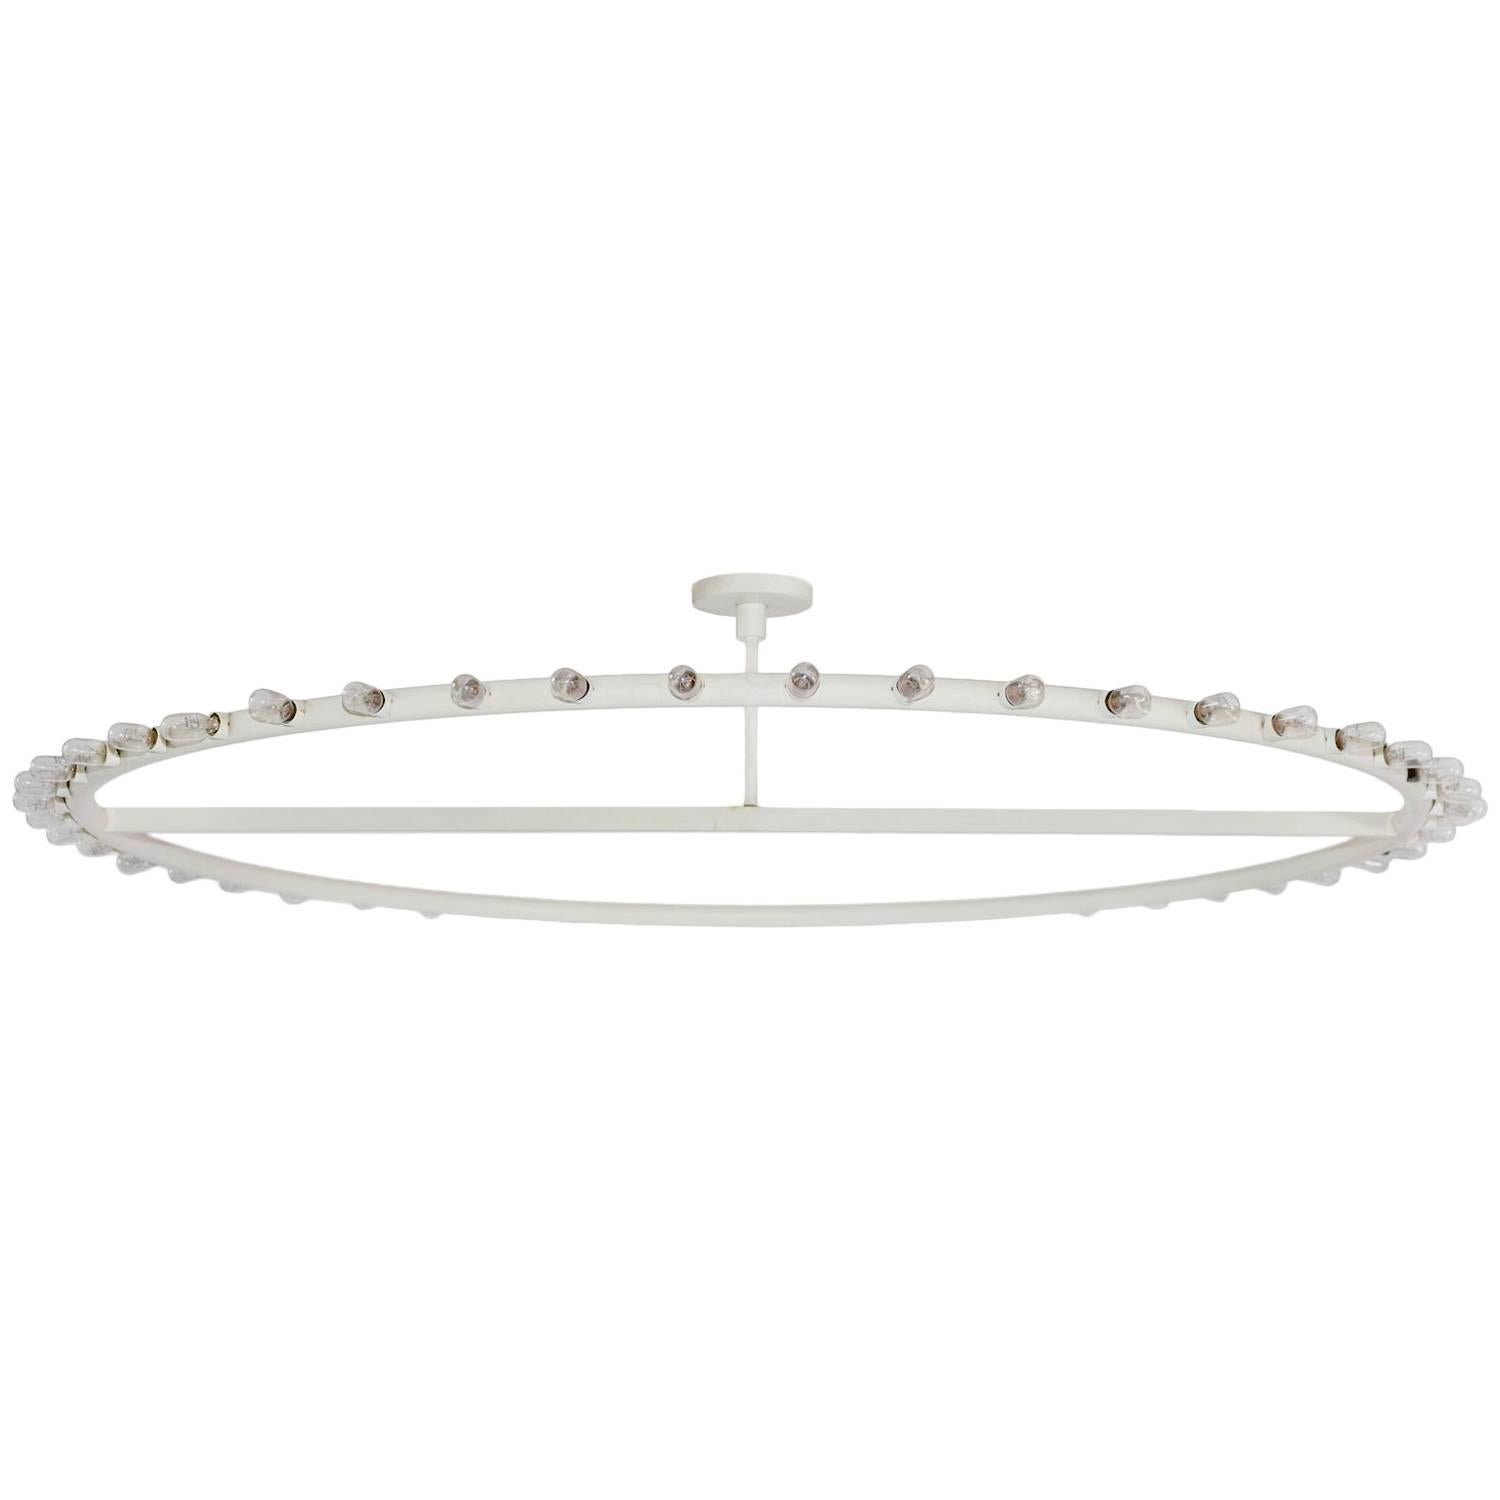 20th Century 48 Bulb Extra Large Hoop Ceiling Light/Chandelier by Alvin Lustig For Sale